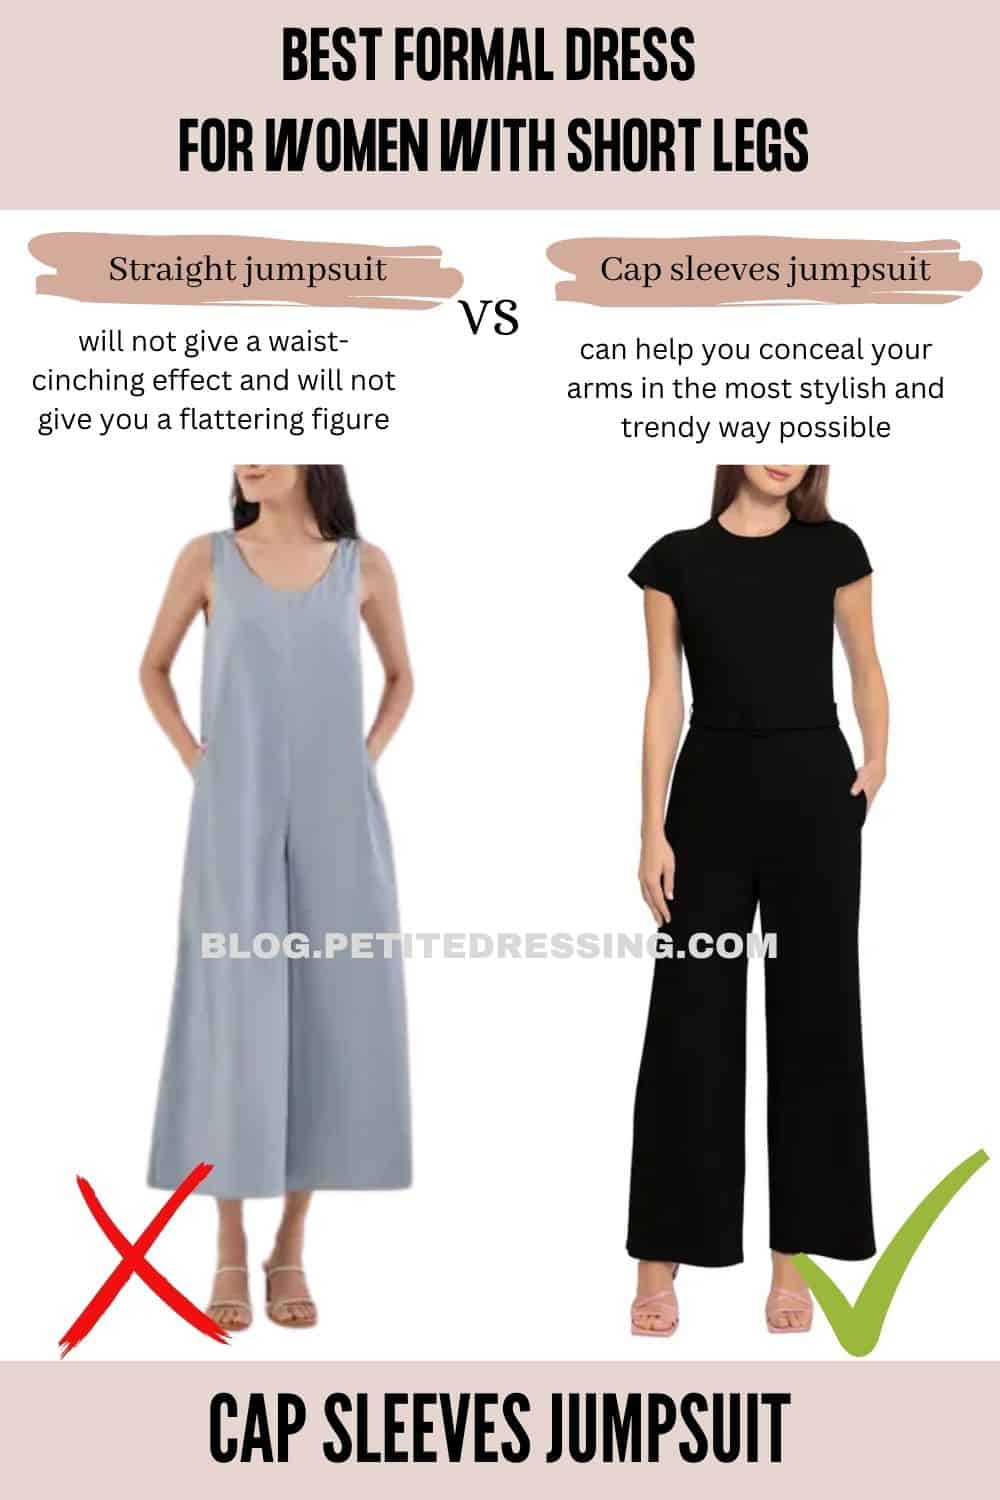 Formal dress guide for women with short legs